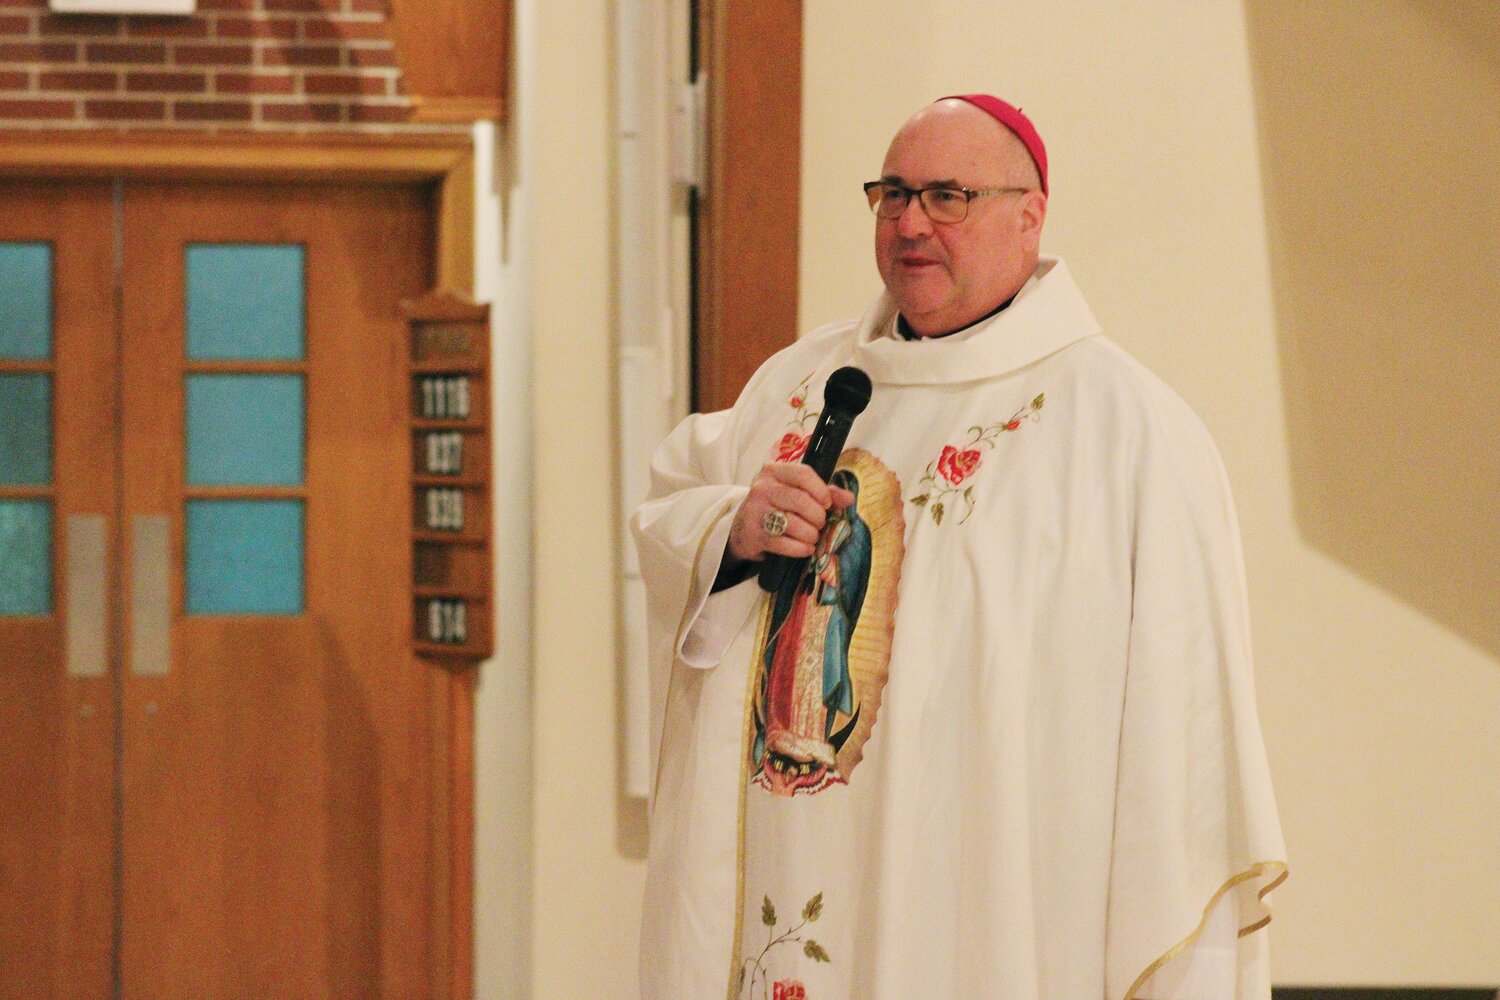 During his homily at the Mass for Life, Bishop Richard G. Henning explained that Christian discipleship requires sacrifice to stand for the rights of the poor and marginalized, including and especially the unborn.